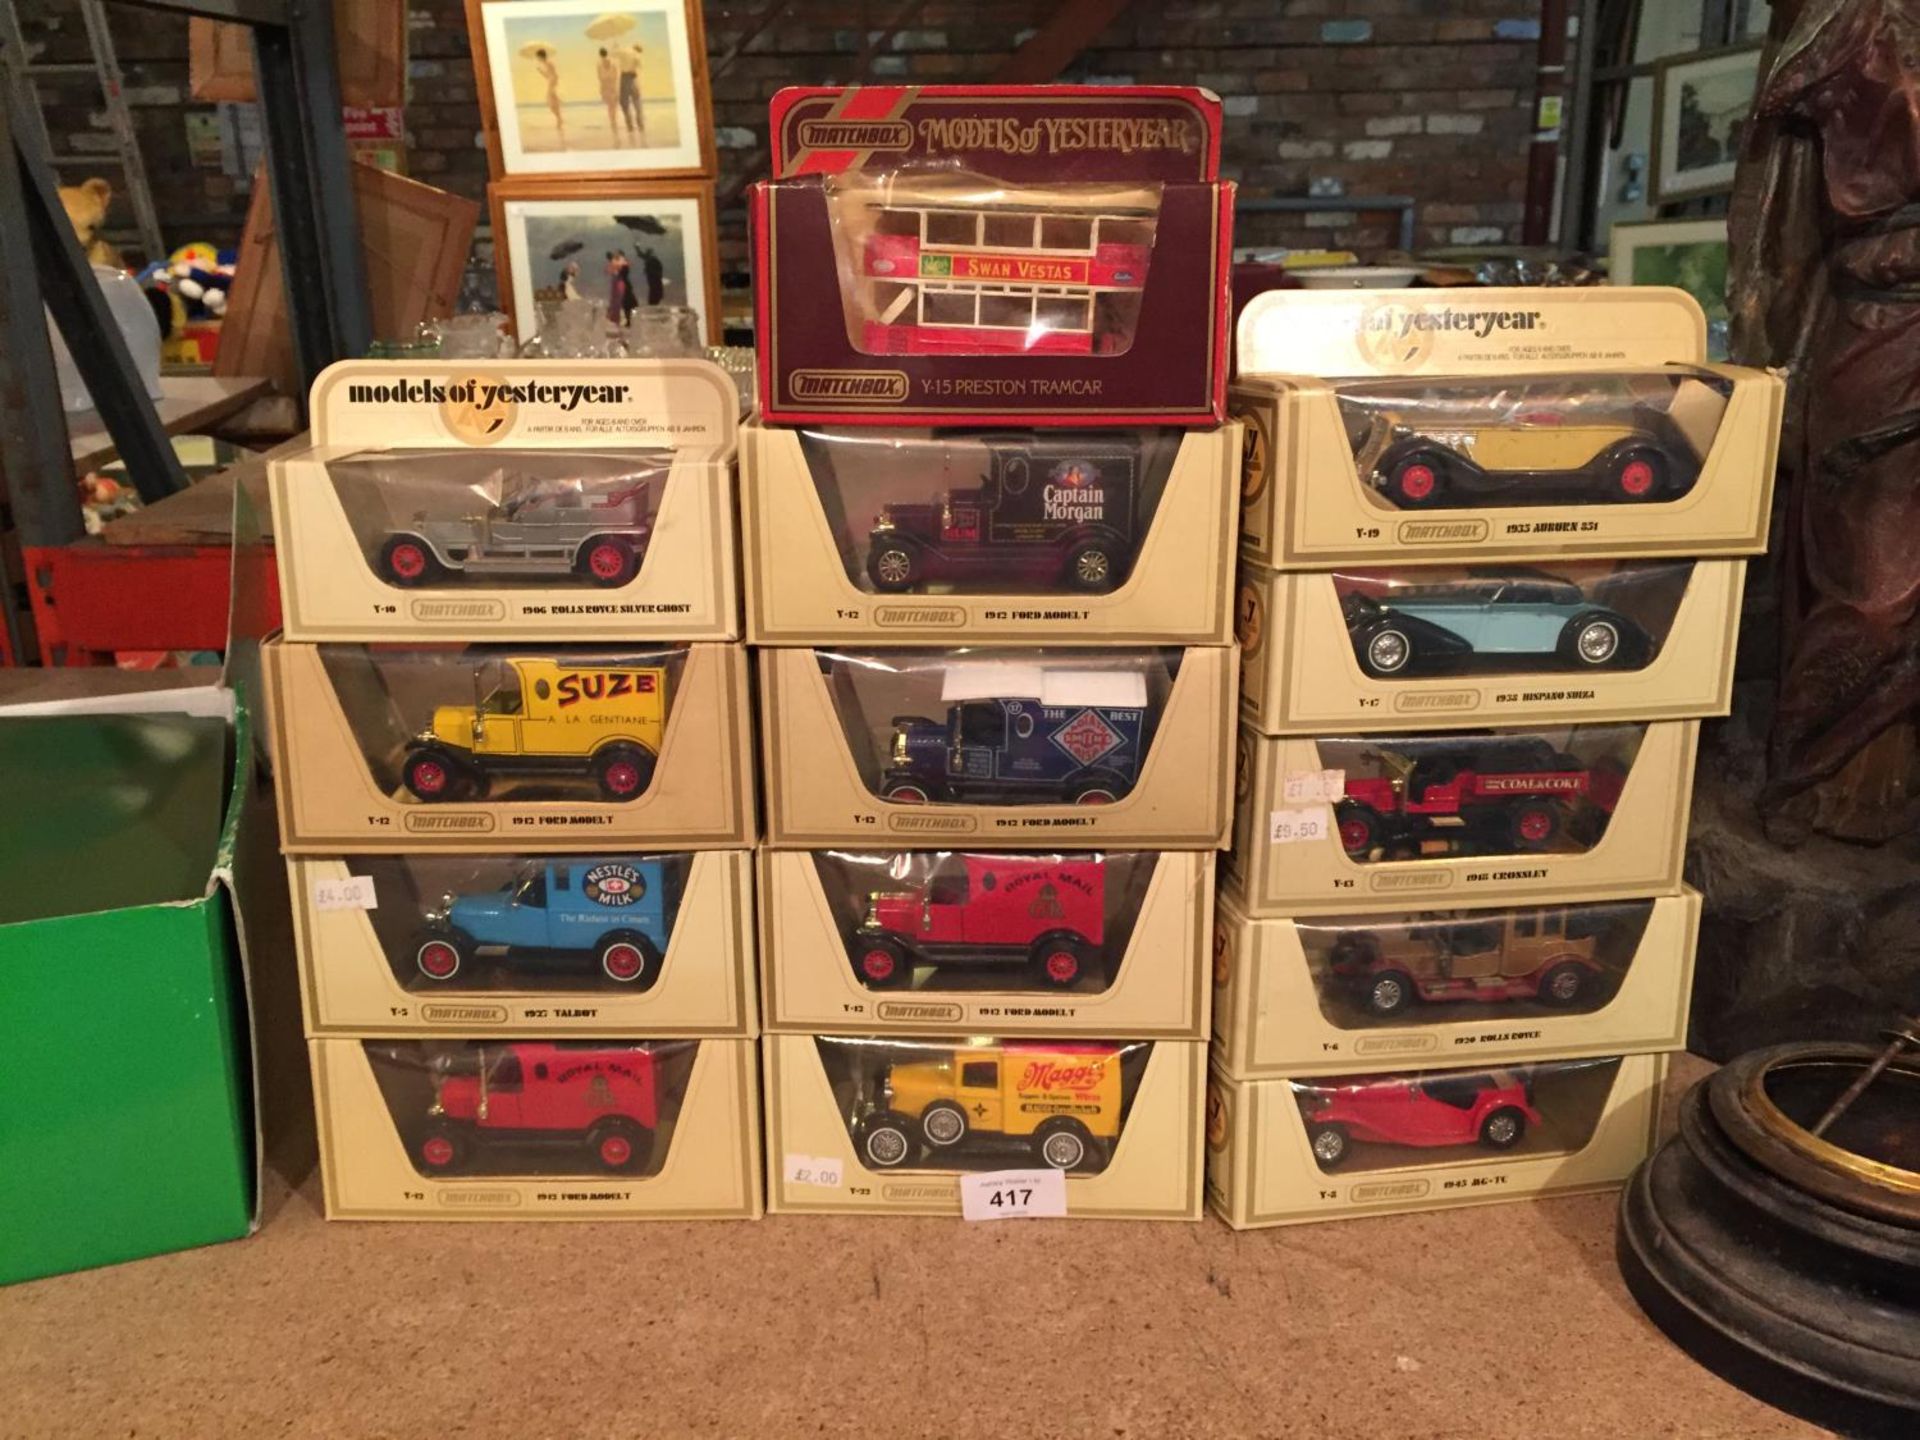 FOURTEEN BOXED MATCHBOX MODELS OF YESTERYEAR TO INCLUDE, ROLLS ROYCE, FORD MODEL T VAN, PRESTON - Image 2 of 4